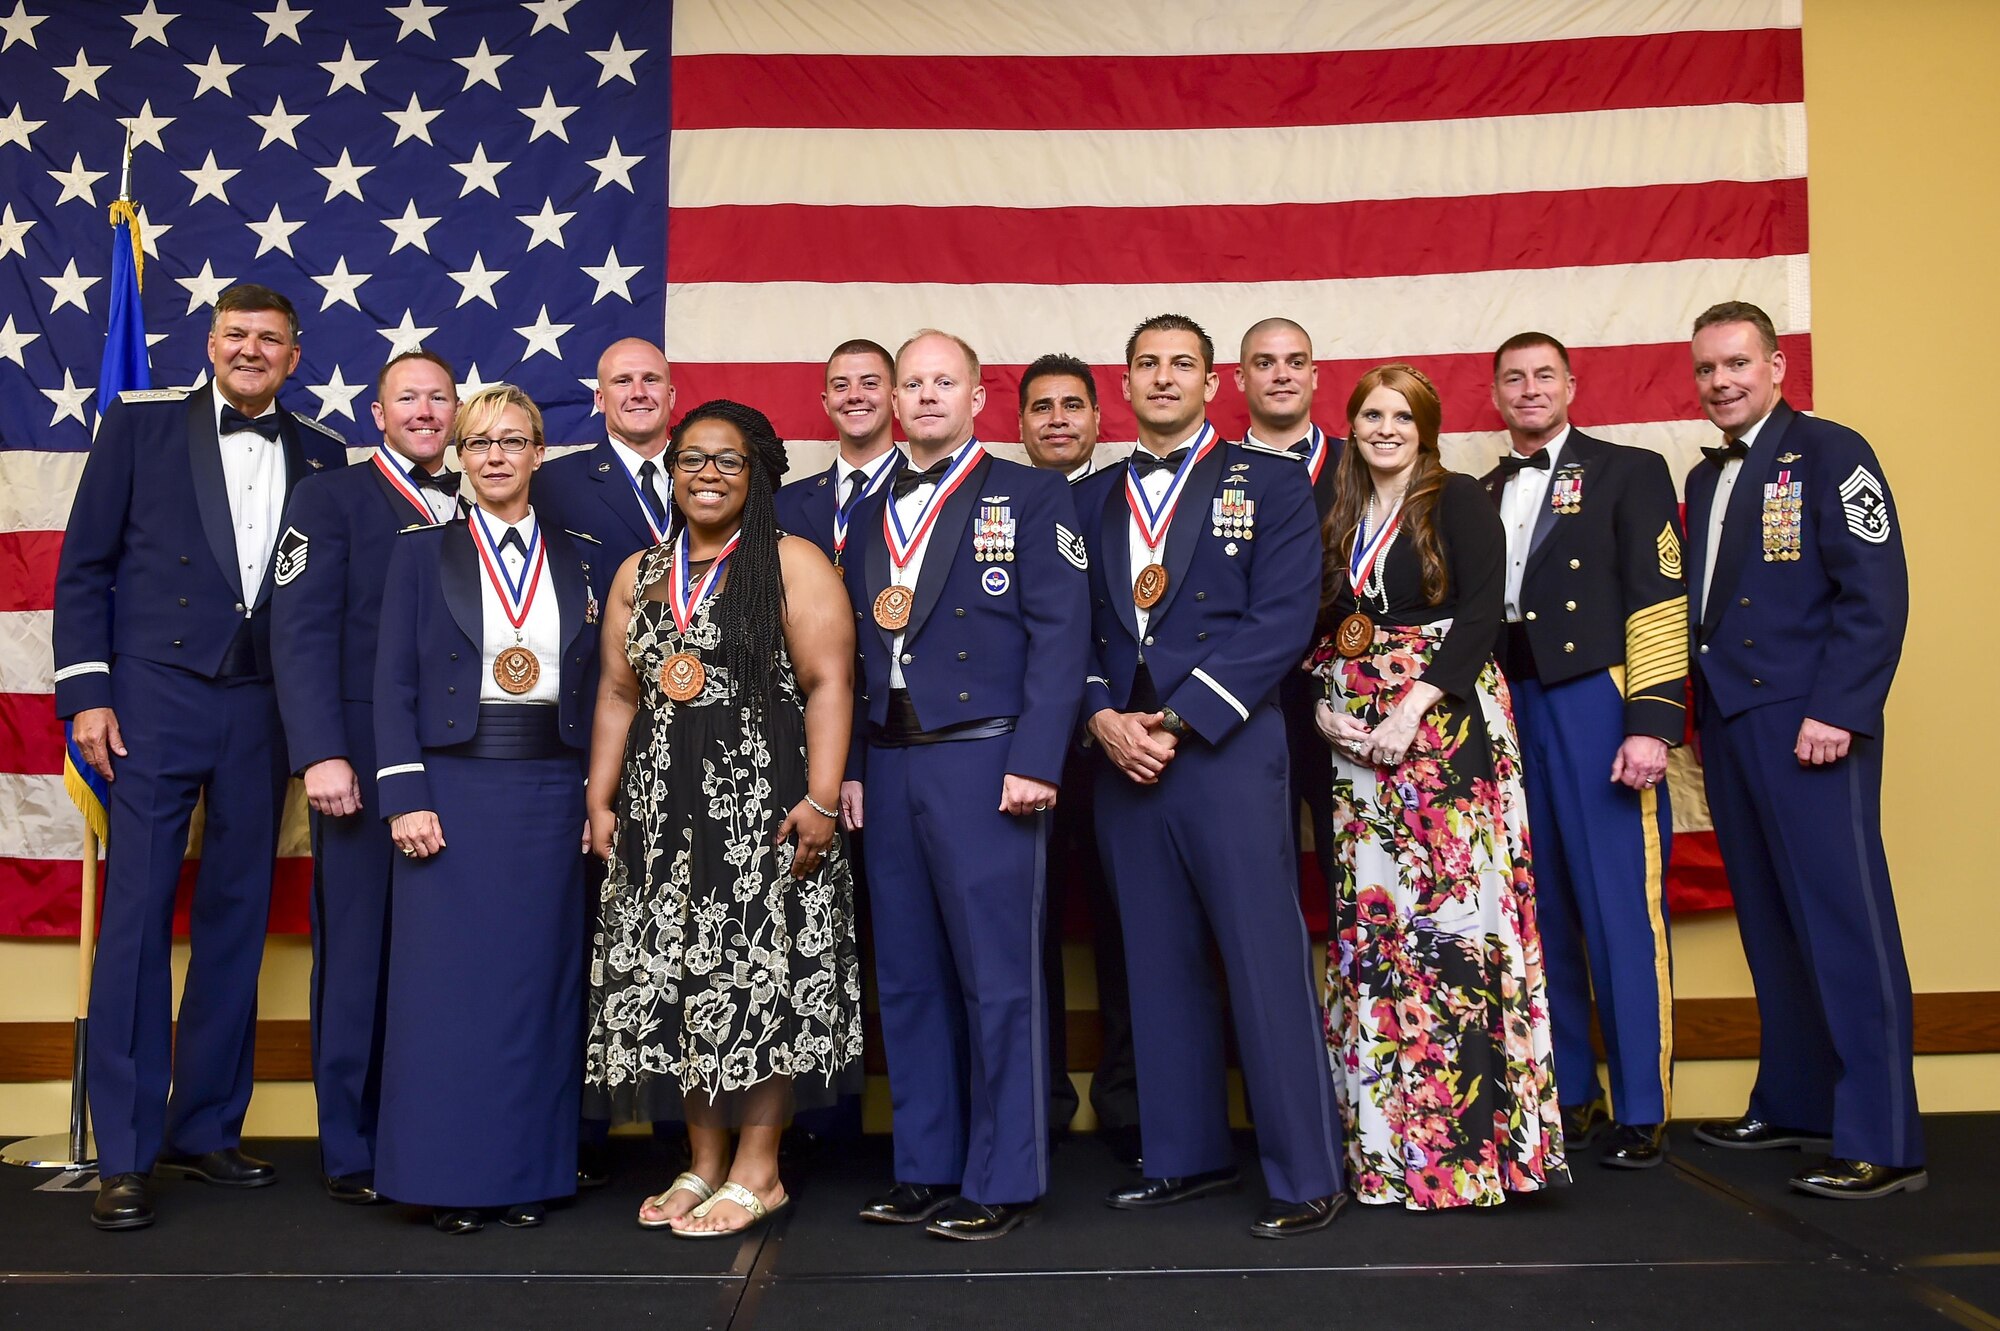 Air Force Special Operations Command Commander Lt. Gen. Brad Heithold, left, and U.S. Special Operations Command Command Sgt. Maj. William Thetford, second from right, celebrate AFSOC's 2016 outstanding Airmen and civilians of the year during a banquet at Hurlburt Field, May 19, 2016. The award winners toured Hurlburt Field May 17 and 18  before being honored at the yearly awards banquet held May 19 to celebrate their accomplishments. (U.S. Air Force photo by Senior Airman Jeff Parkinson)